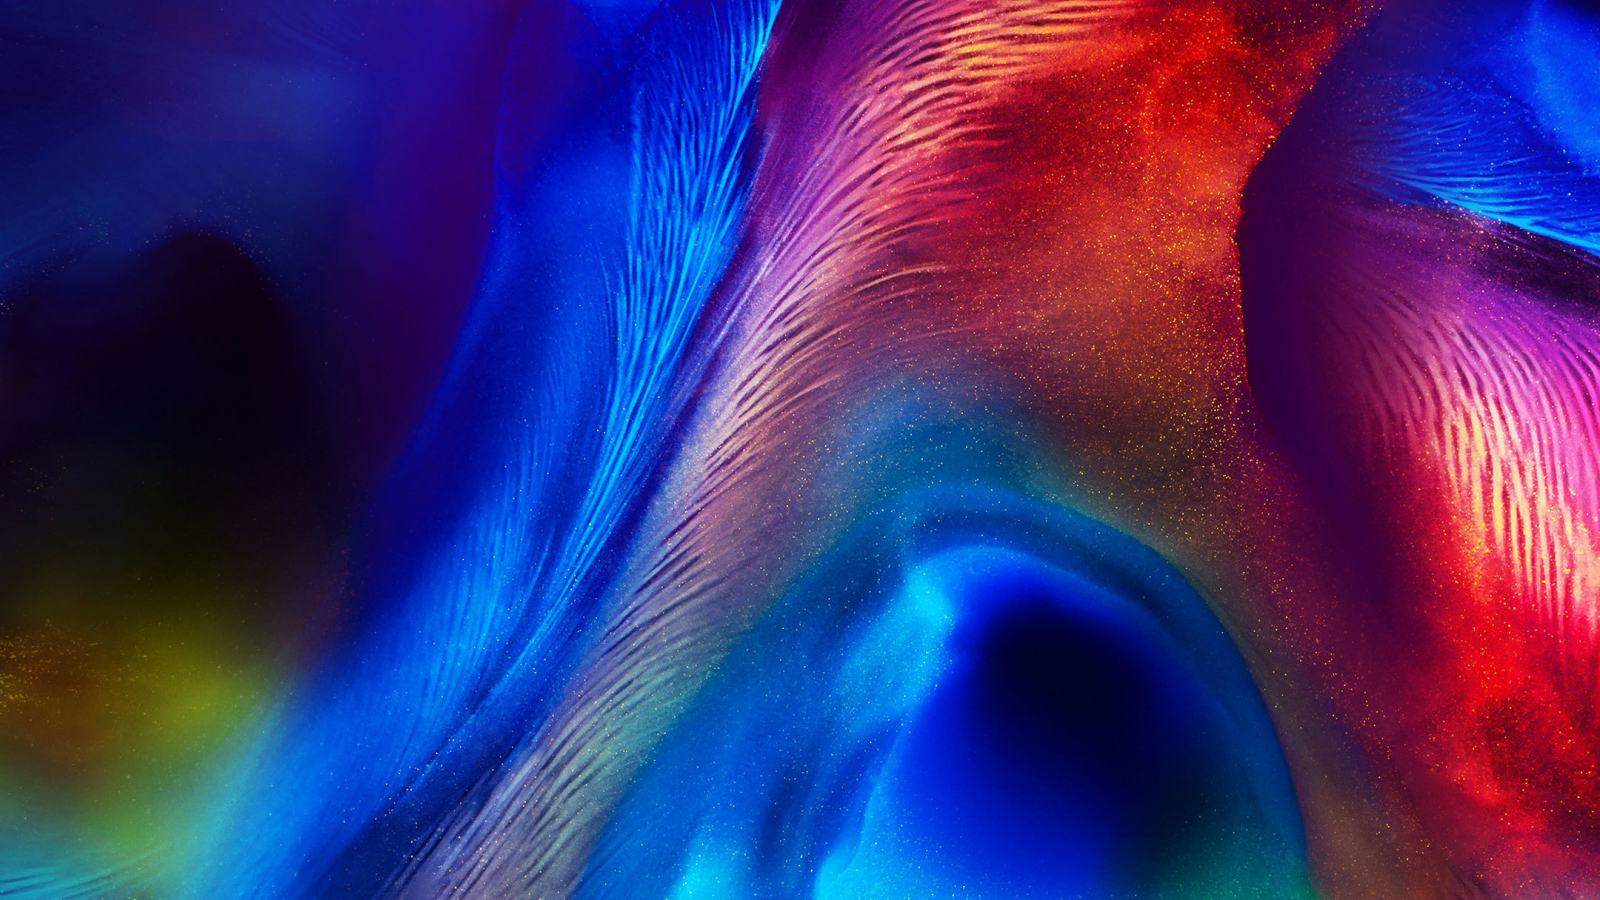 Download wallpaper 1600x900 abstract, colorful, vivid, texture, 16:9 ...